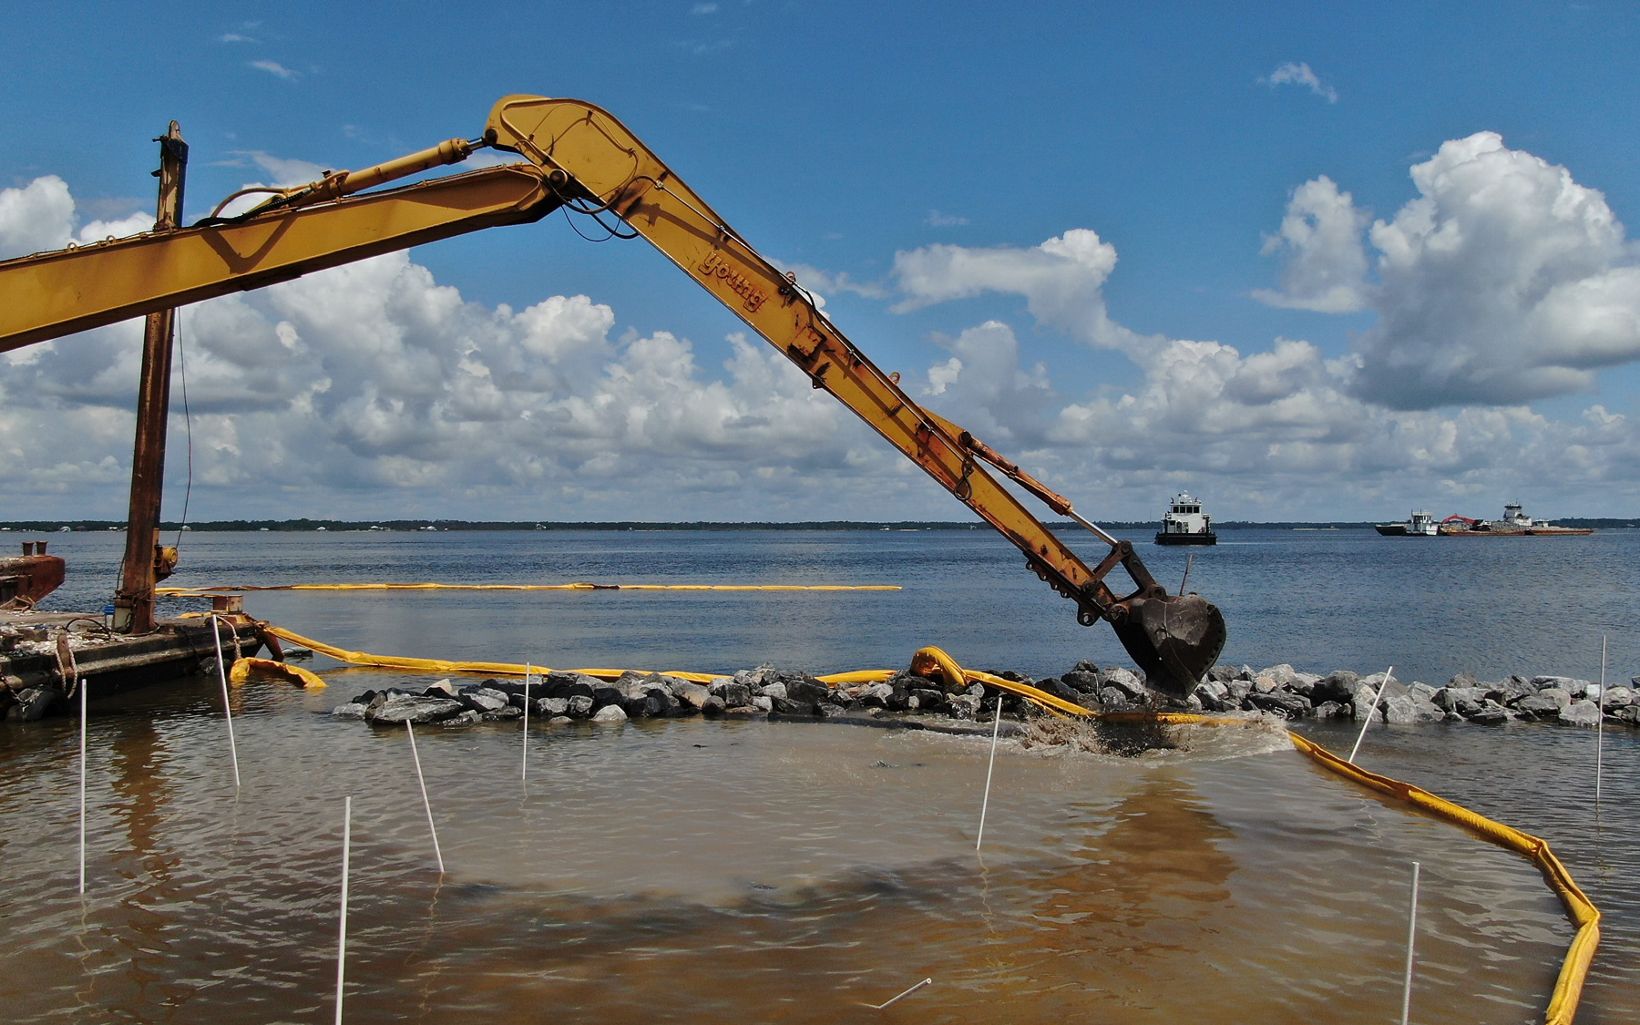 Reef Construction An excavator works on installing the last reefs in Blackwater Bay. © Russell C. Mick